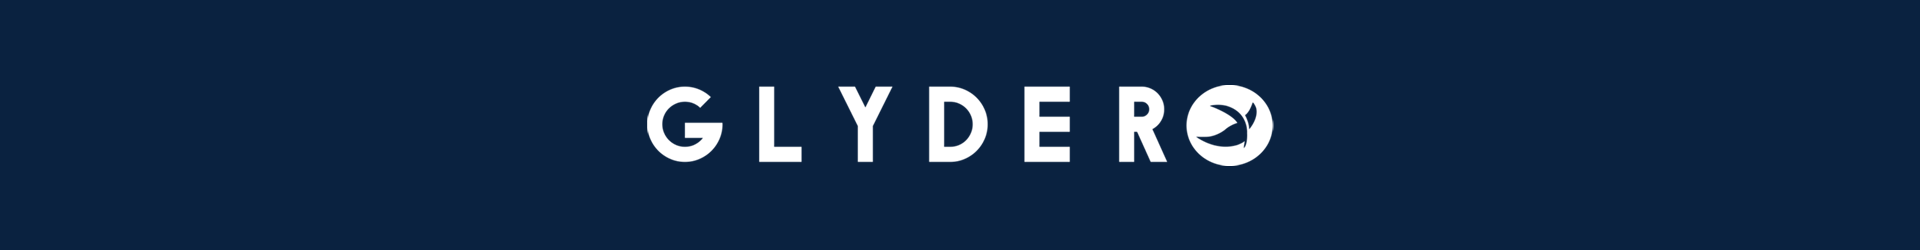 Glyder landing page banner with white logo over a navy blue background